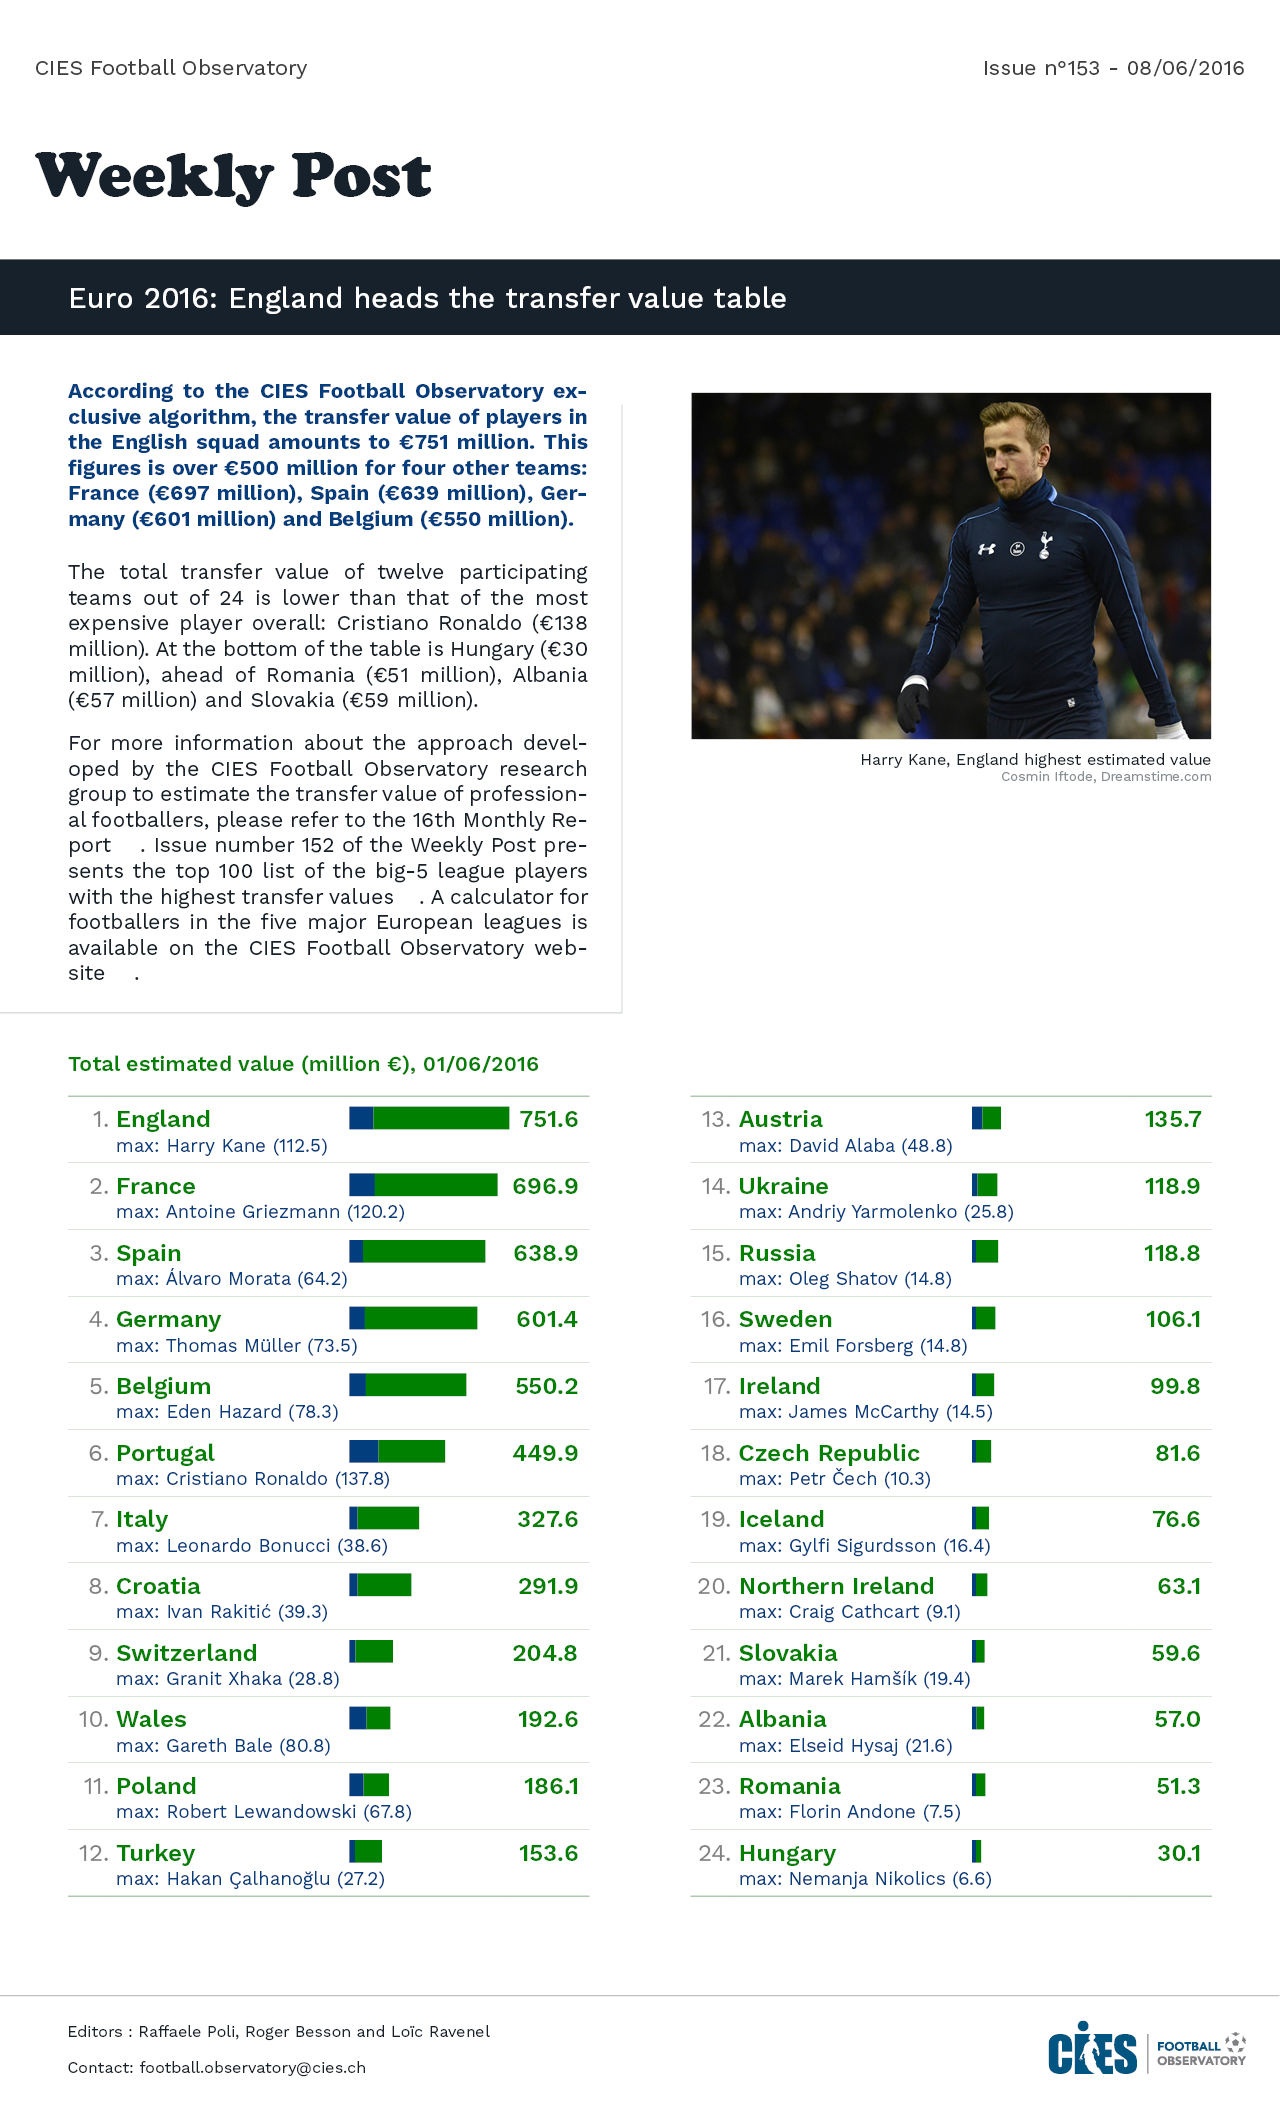 Euro 2016: England heads the transfer value table